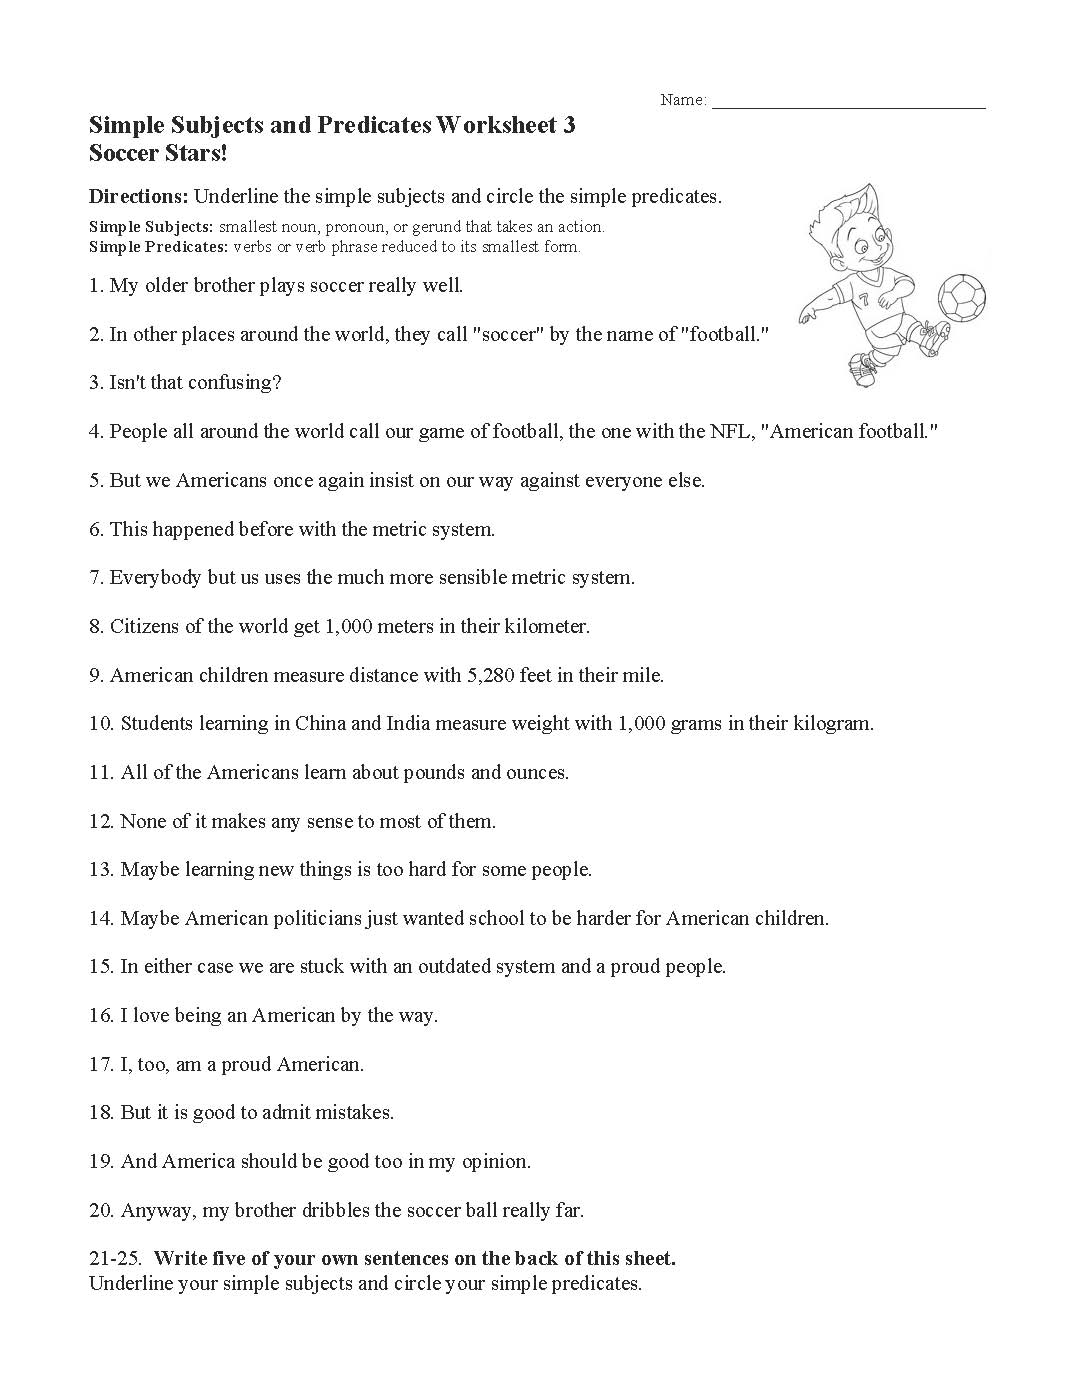 simple-subjects-and-predicates-worksheet-3-preview